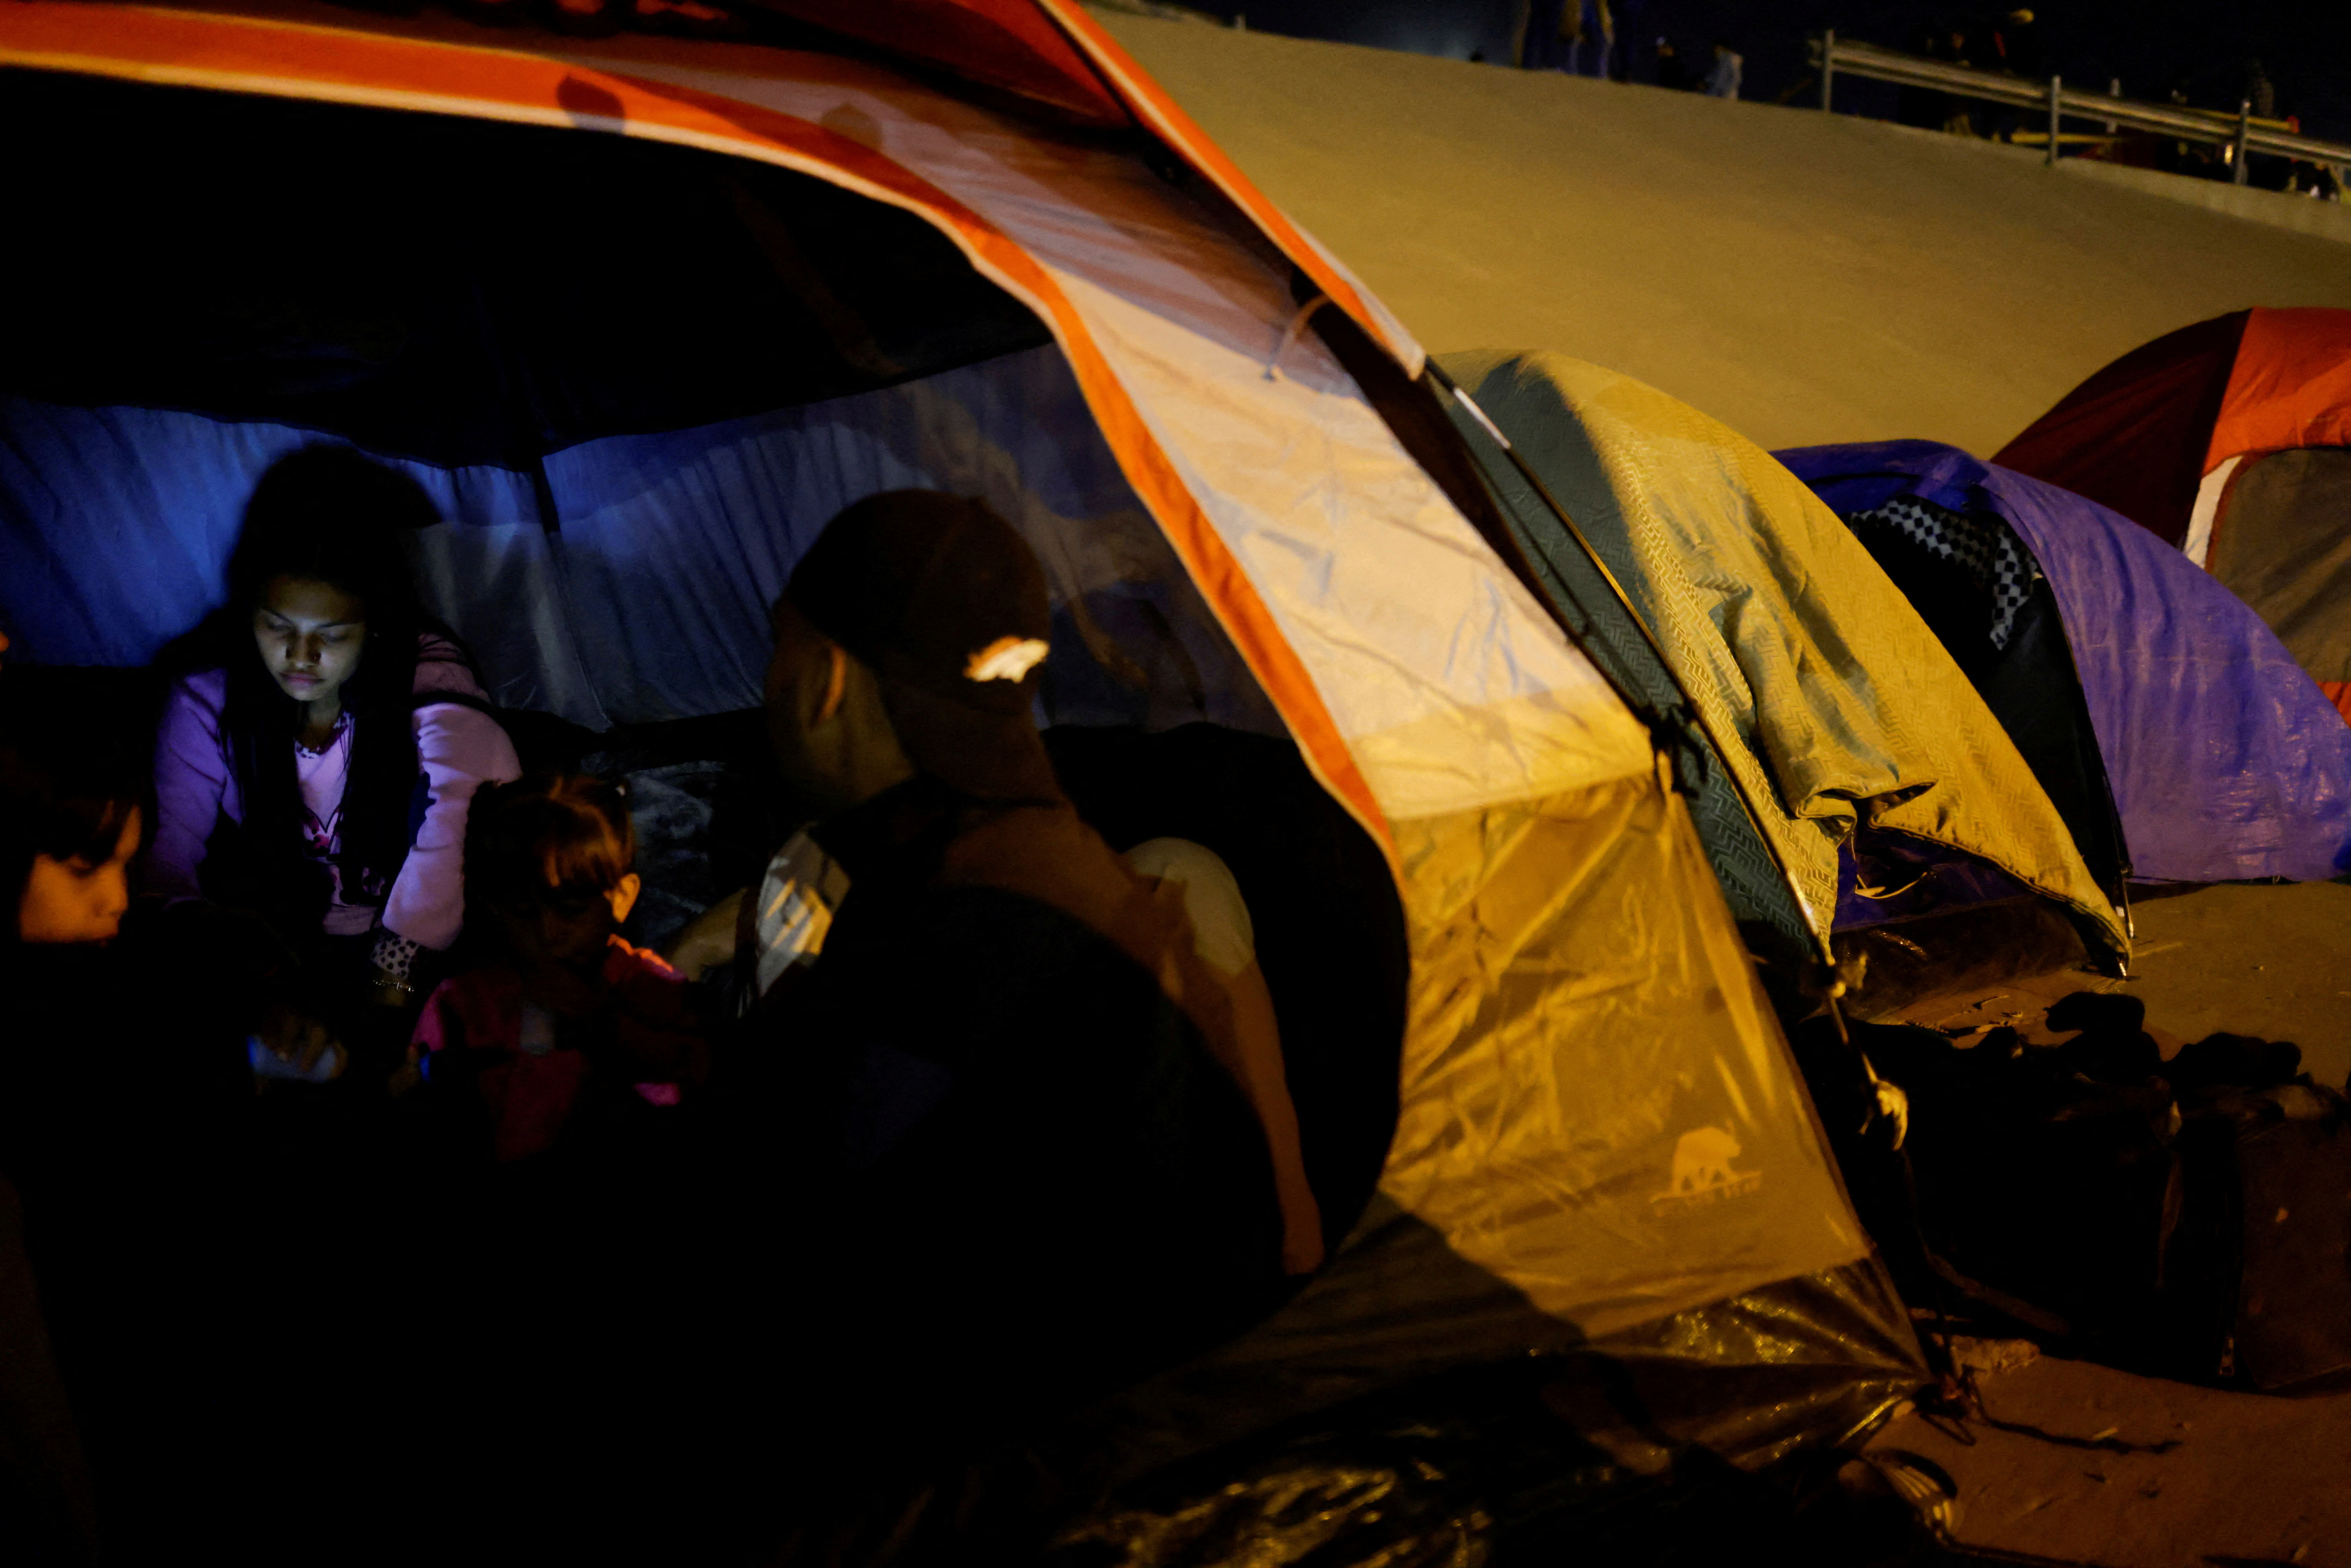 Venezuelan migrants stand in a camp on the banks of the Rio Bravo river, in Ciudad Juarez